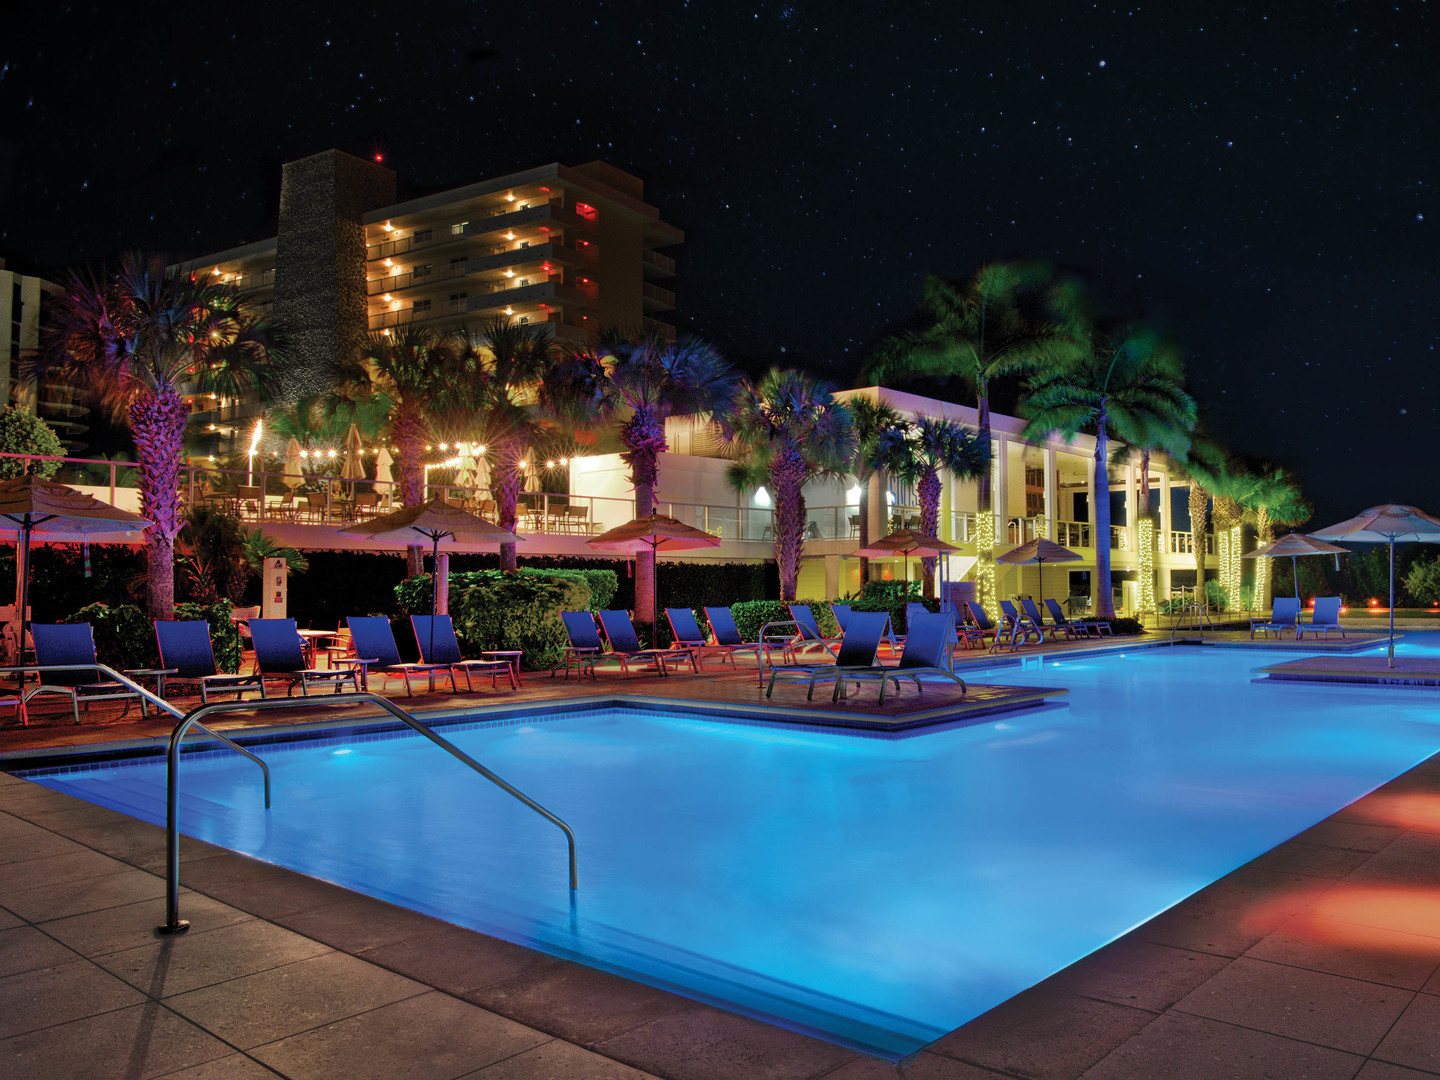 Marriott's Crystal Shores Main Pool. Marriott's Crystal Shores is located in Marco Island, Florida United States.